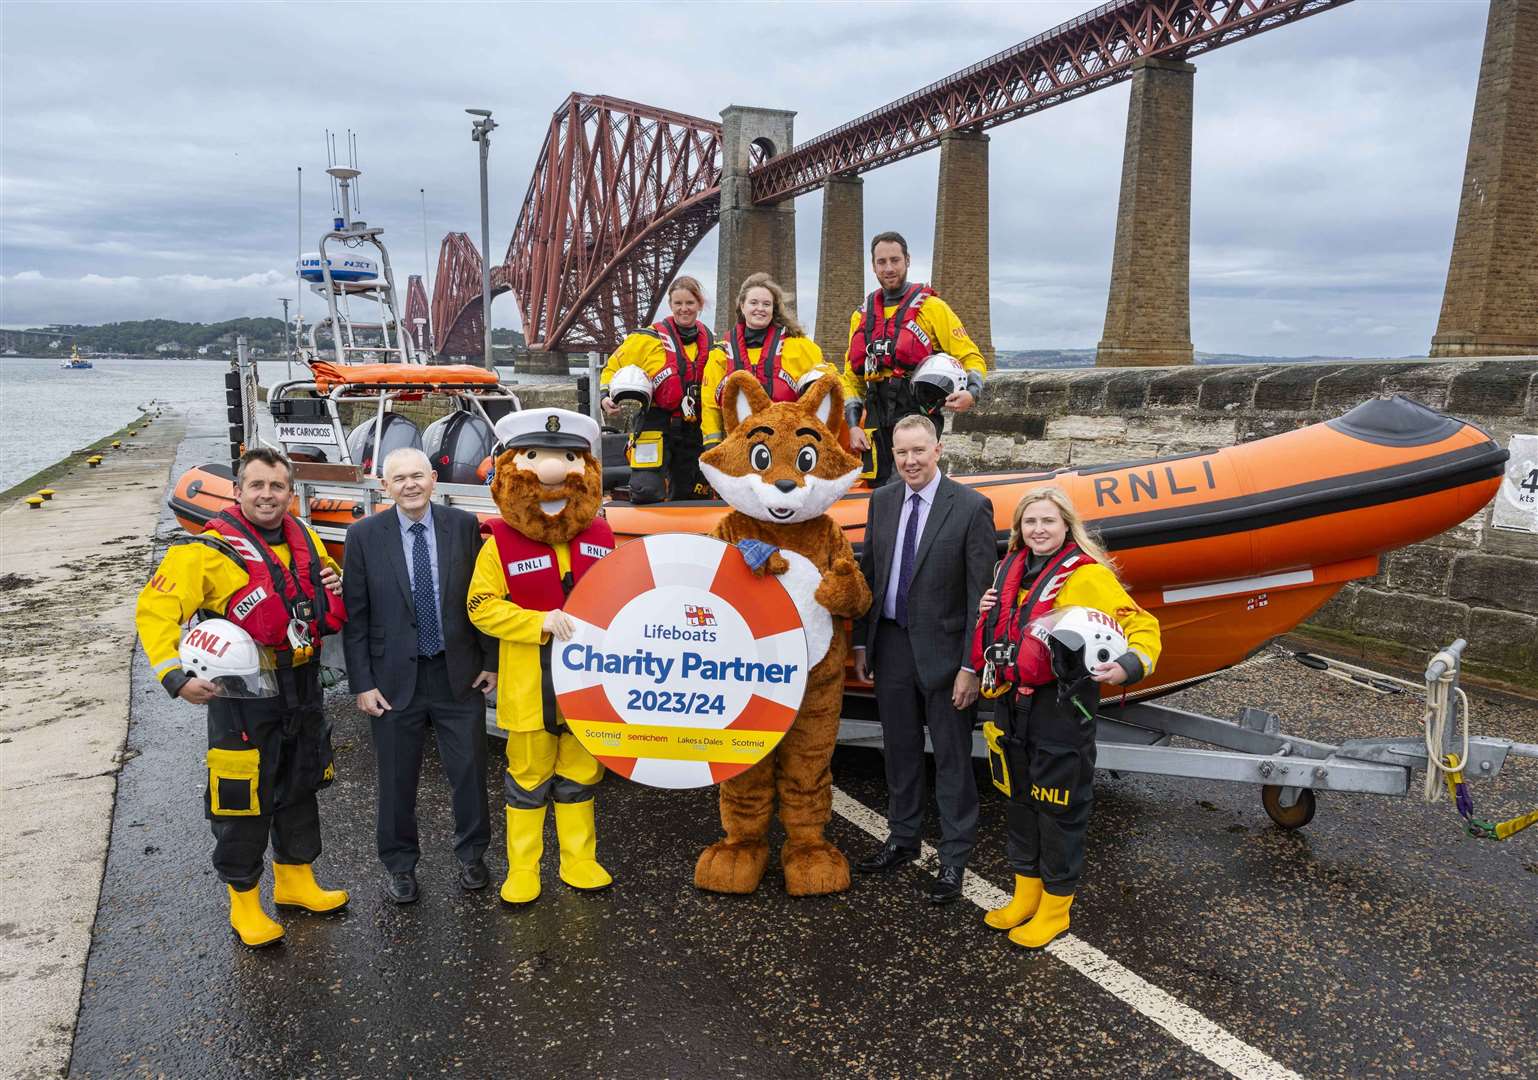 Scotmid are hoping to raise enough cash to purchase an Atlantic 85 lifeboat for the RNLI.